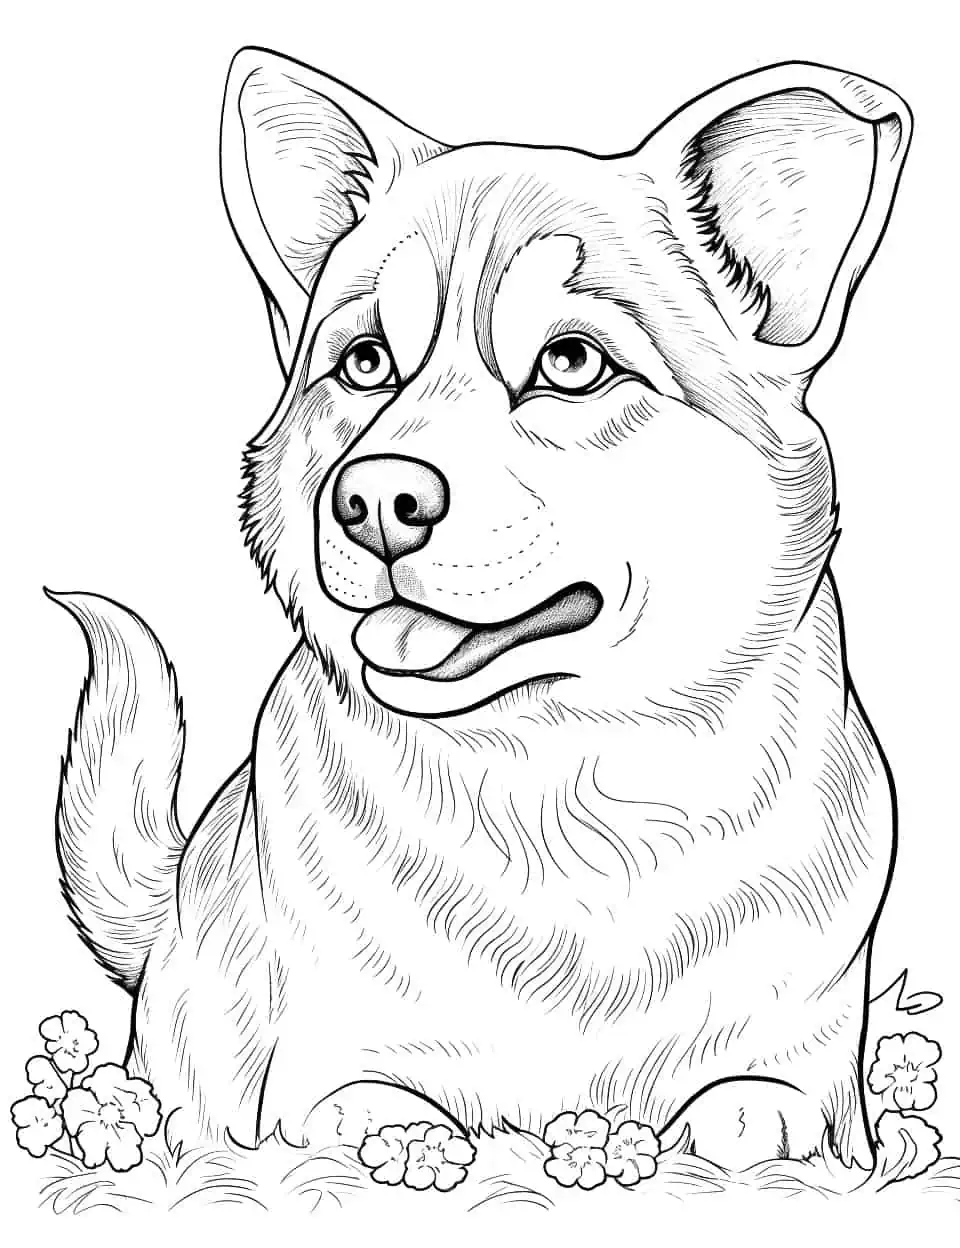 Dog Drawing of a Husky Coloring Page - A vibrant dog drawing of a Husky, full of energy and playfulness.